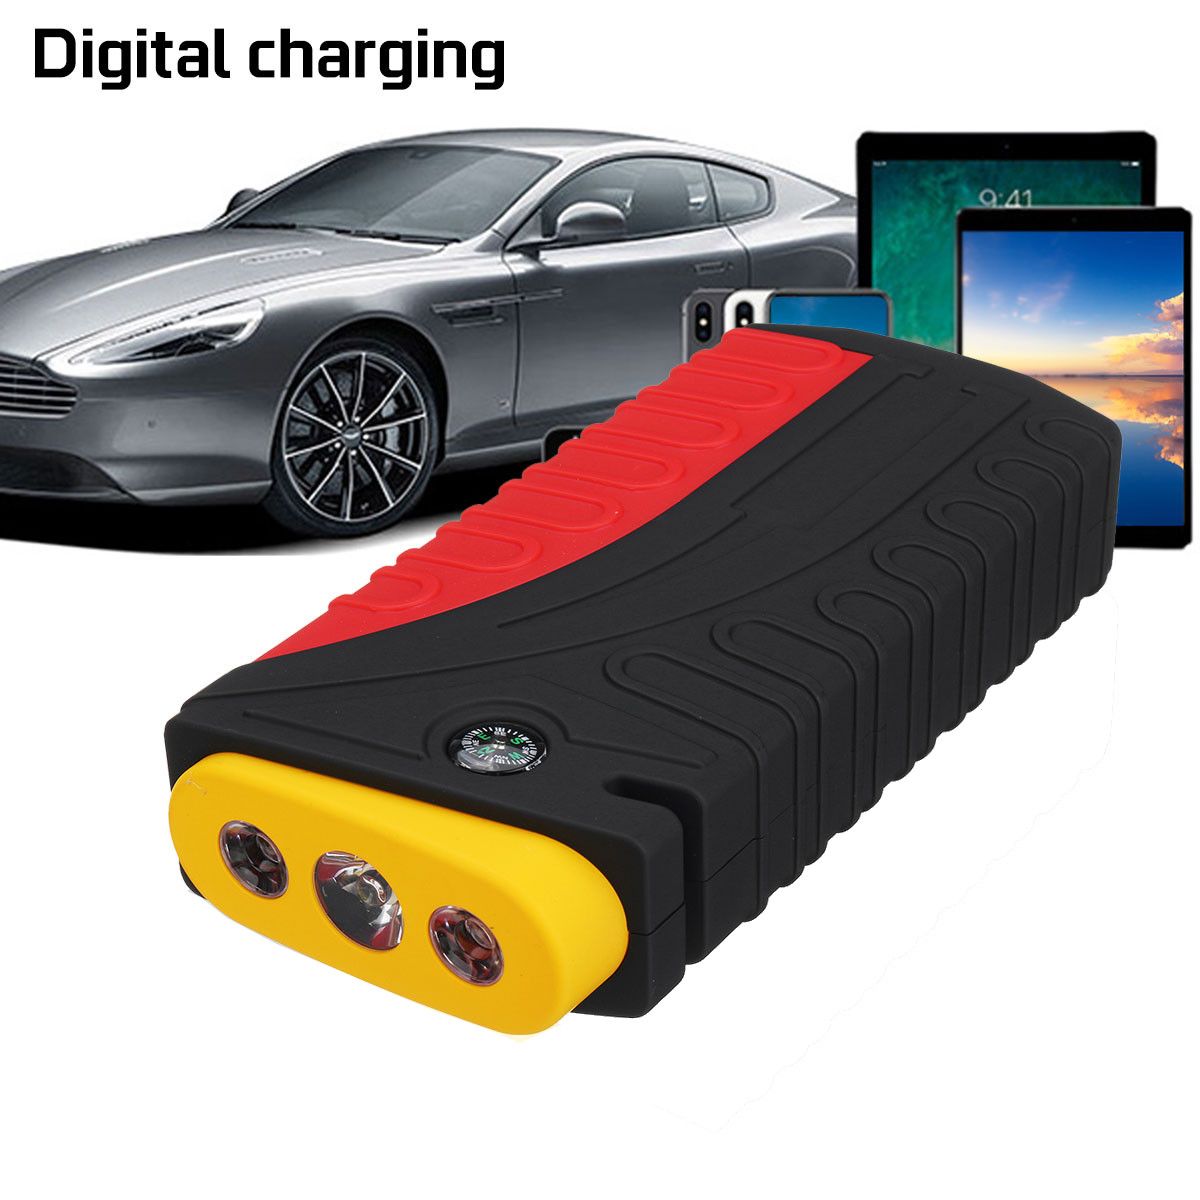 20000mAh-Car-Jump-Starter-Emergency-Battery-Booster-Waterproof-USB-LED-Flashlight-With-Safety-Hammer-1477000